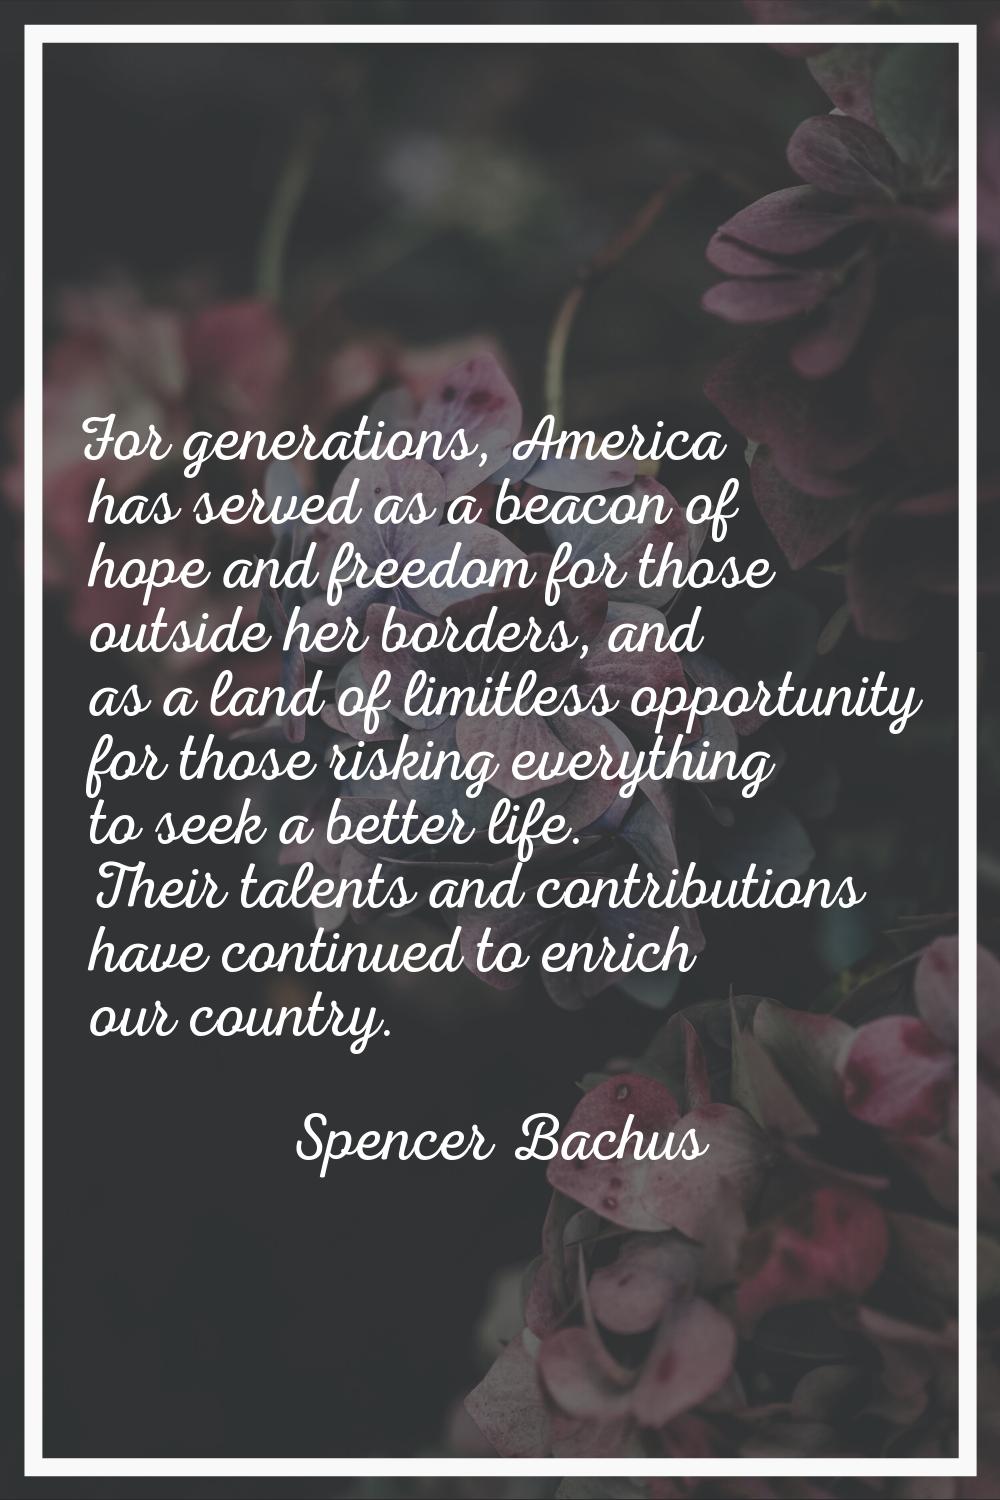 For generations, America has served as a beacon of hope and freedom for those outside her borders, 